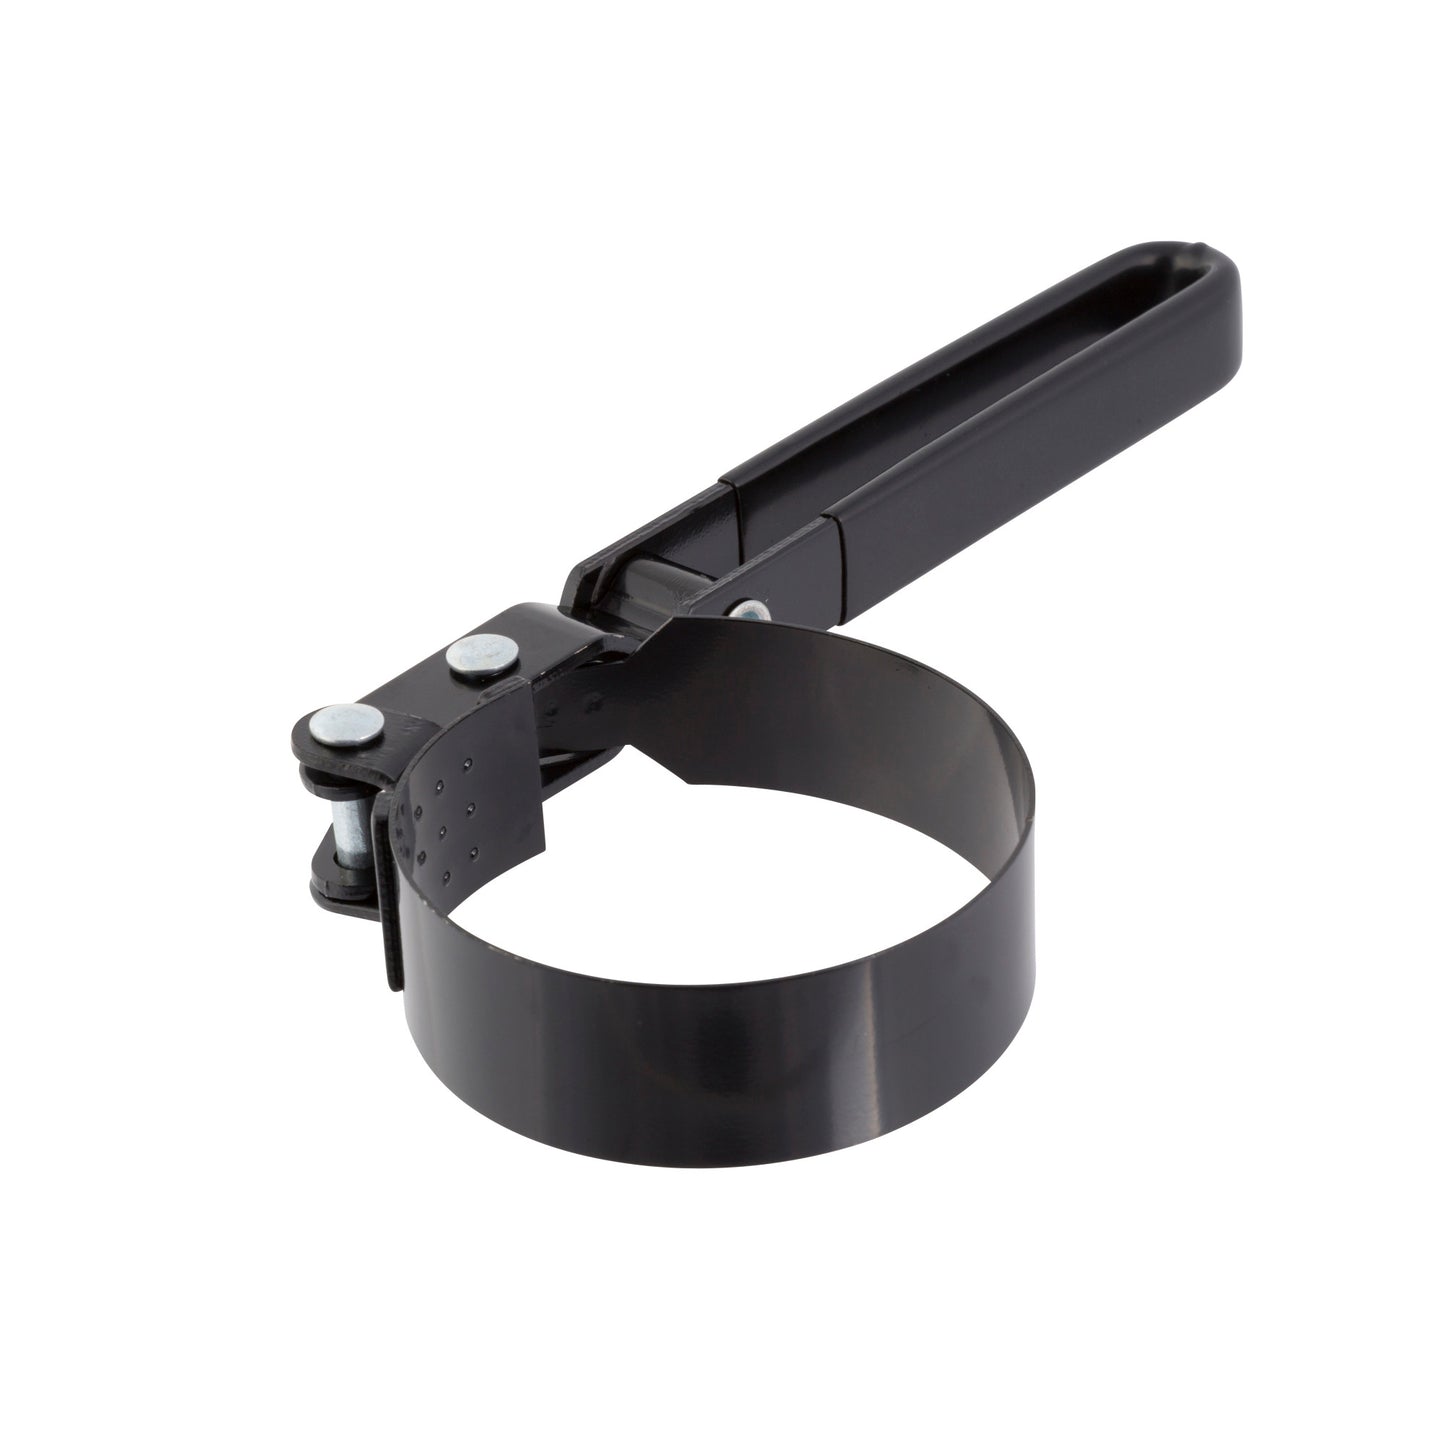 Oil Filter Wrench 2-1/2-inch to 3-inch